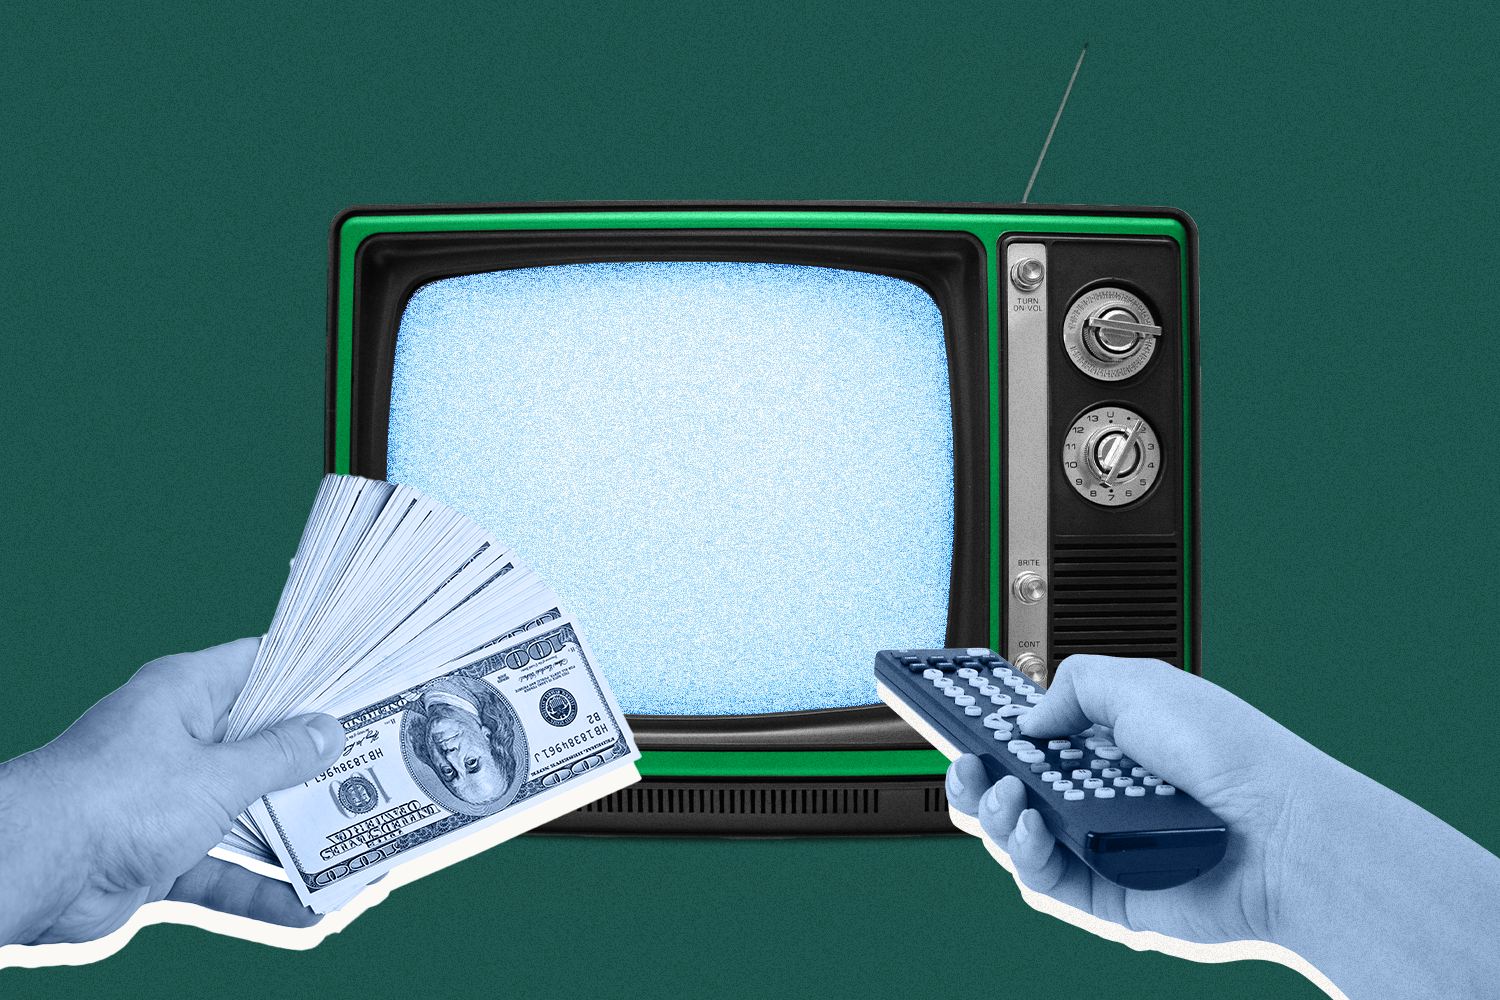 A left hand holding stacks of $100 dollar bills and a right hand pointing a TV remote at a retro TV